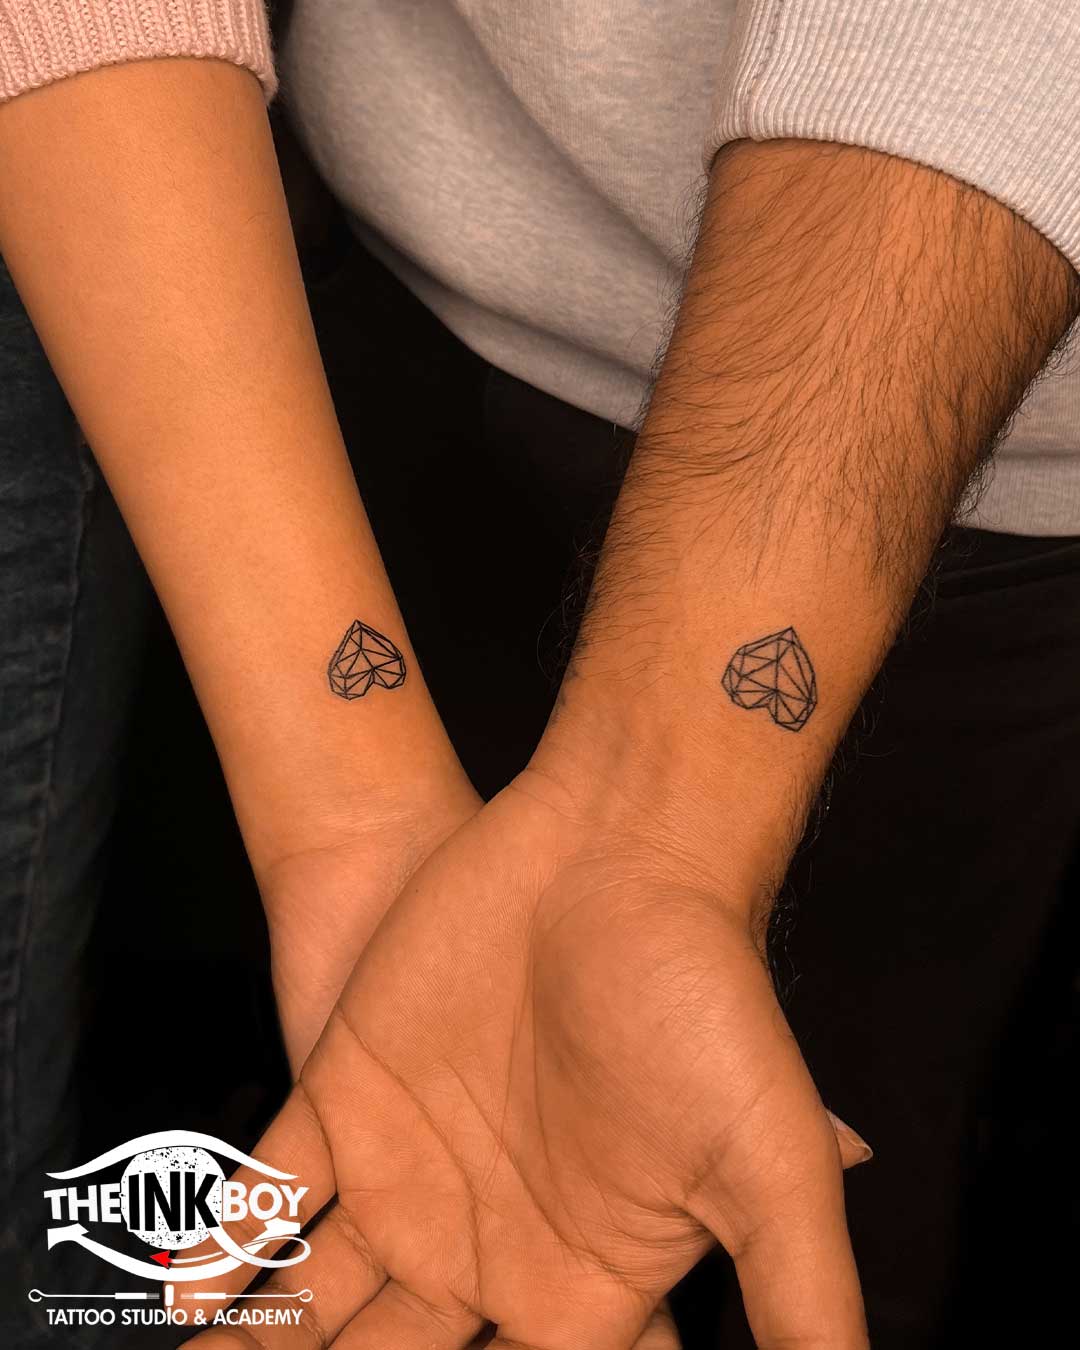 Couple tattoos that will make your knees buckle | City Magazine